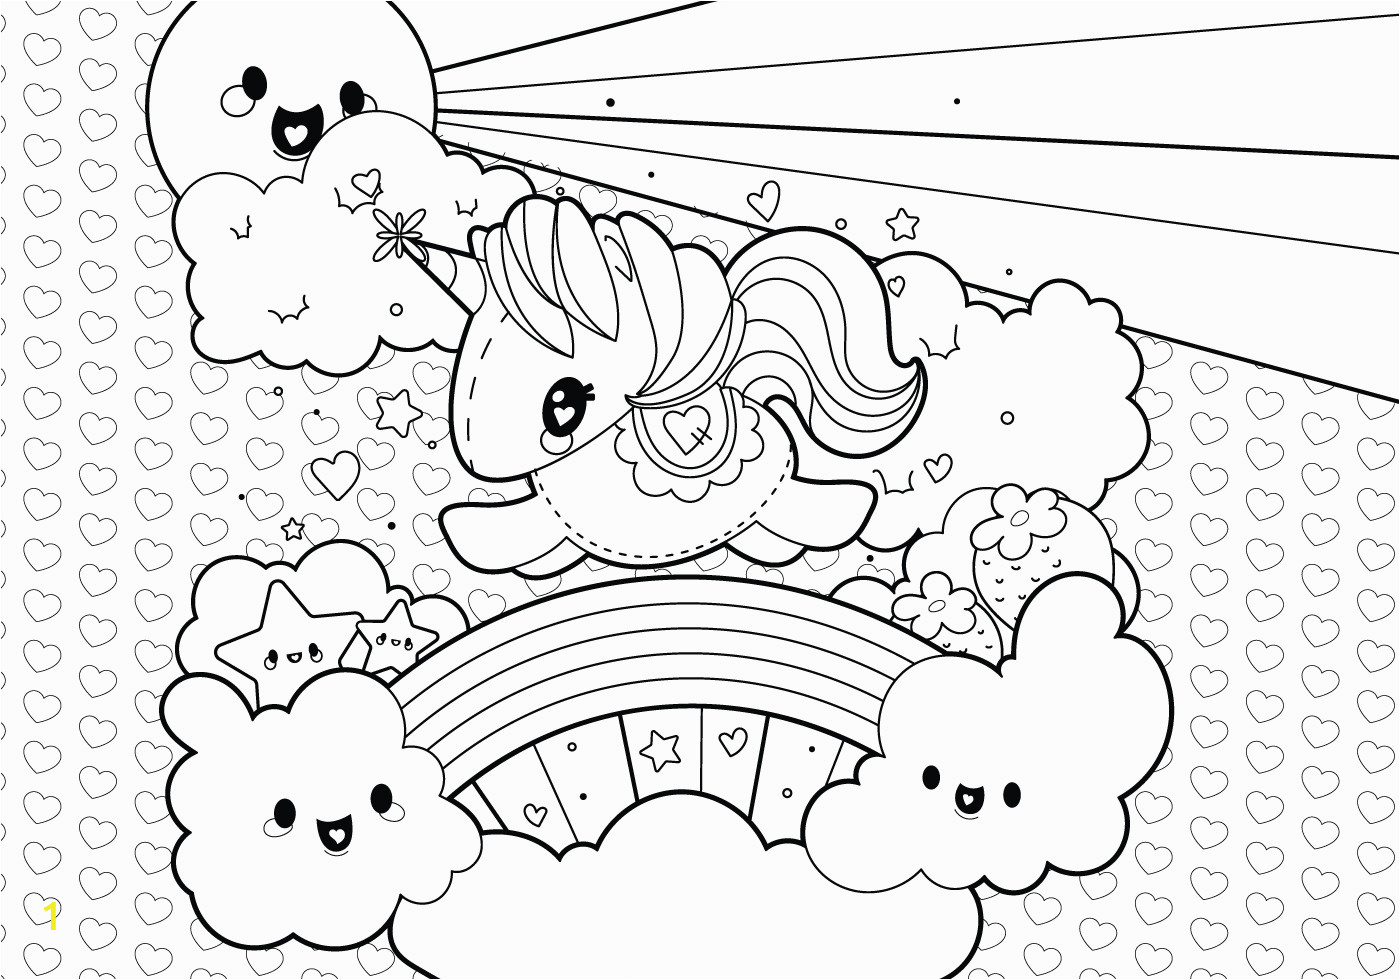 Cute Unicorn Coloring Pages for Adults Rainbow Unicorn Scene Coloring Page Download Free Vector